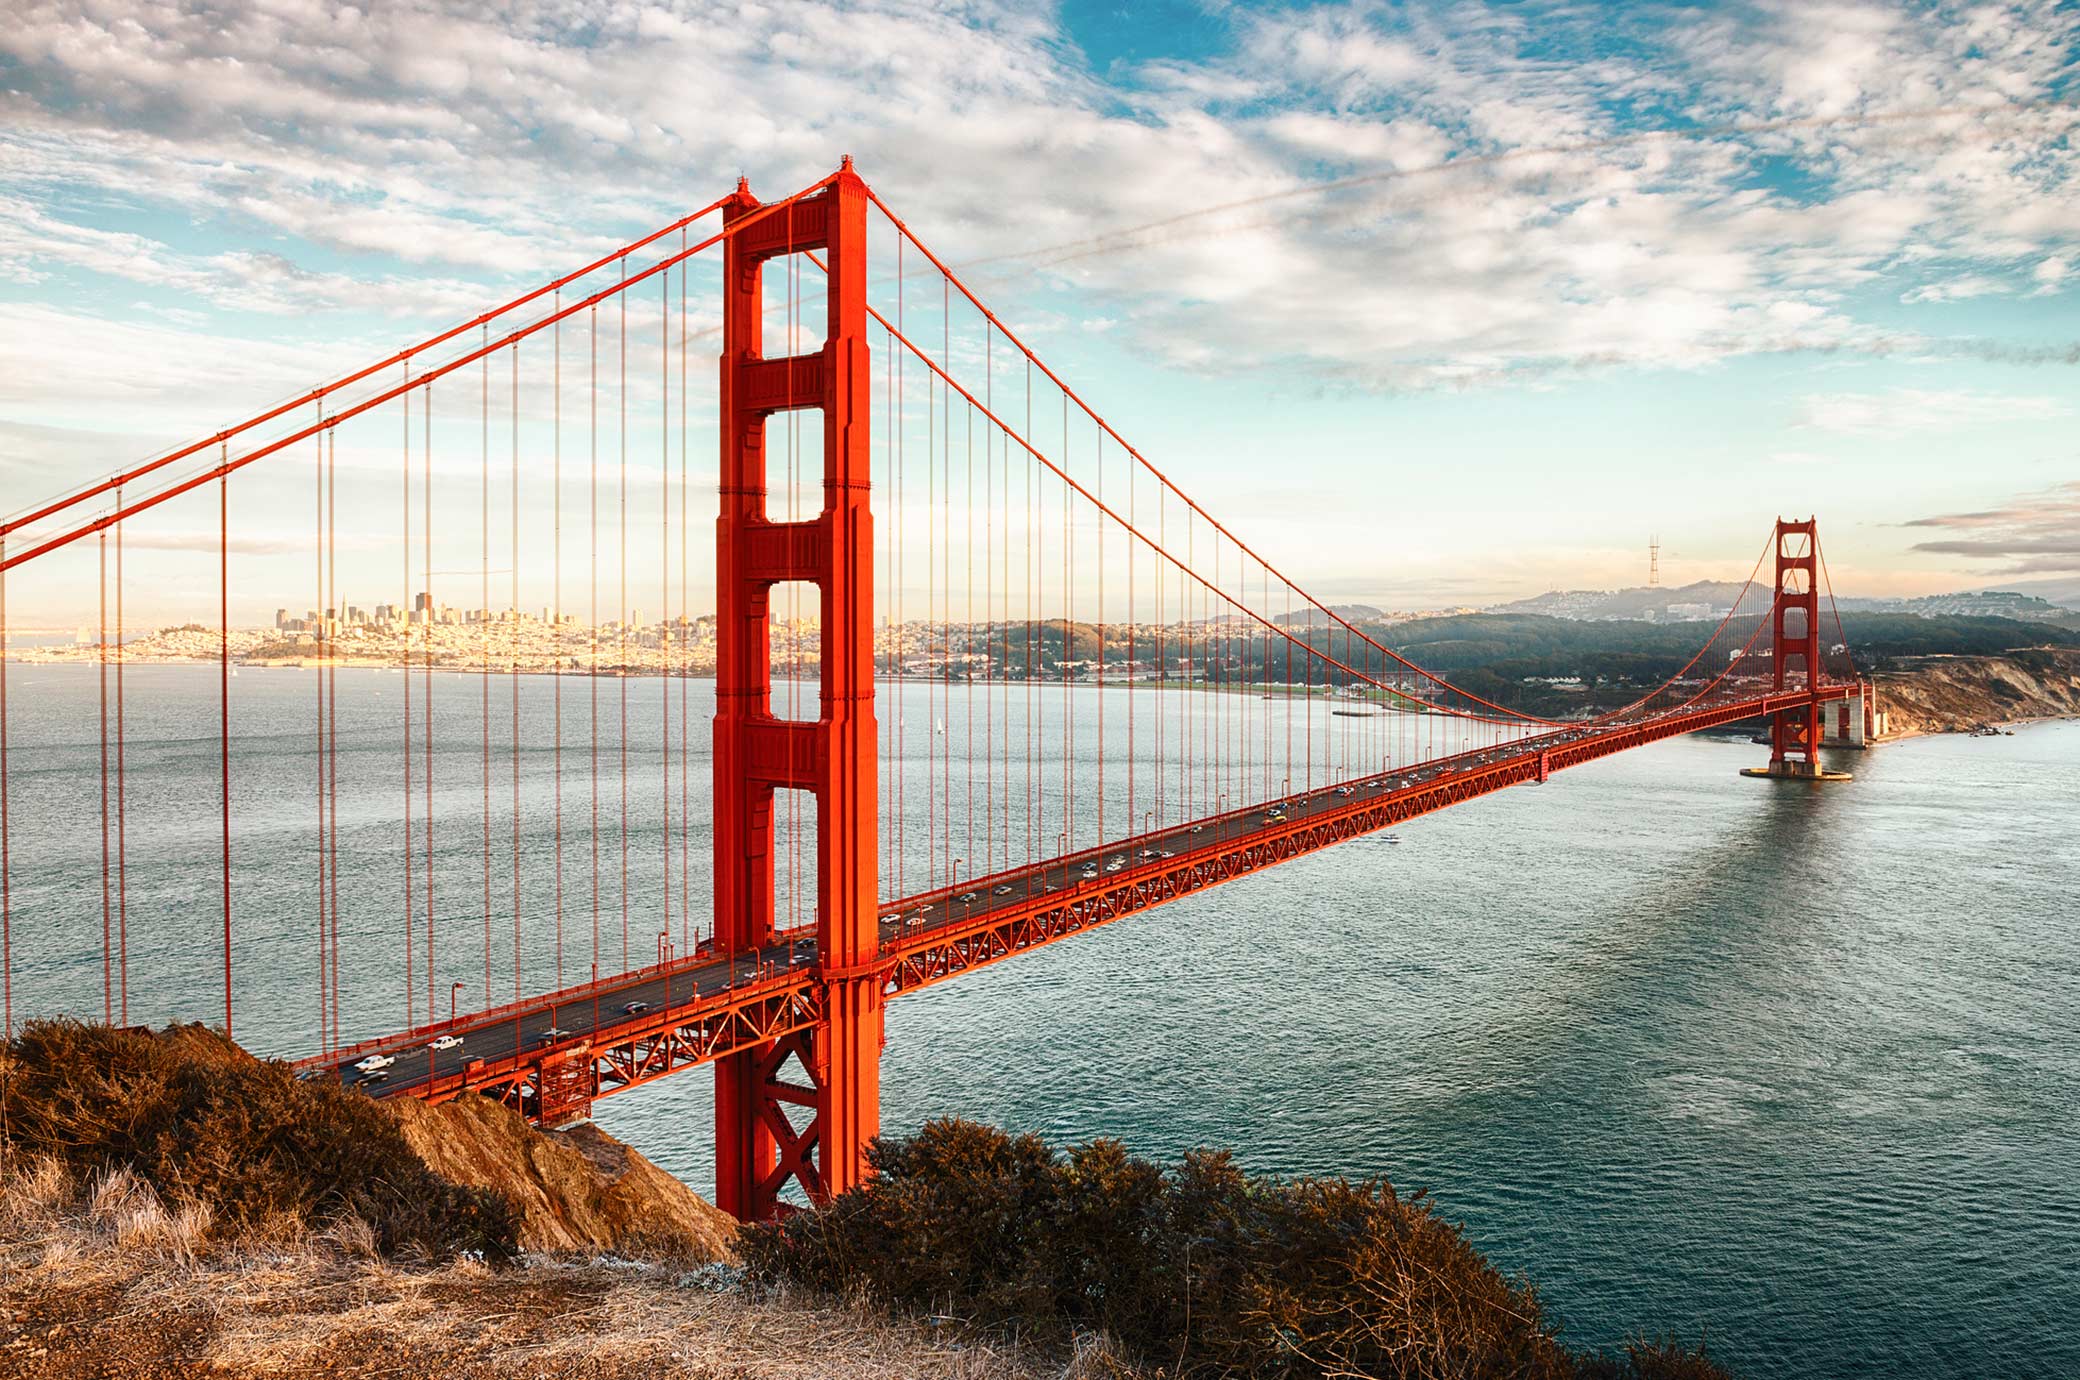 Things to do near San Francisco aiport